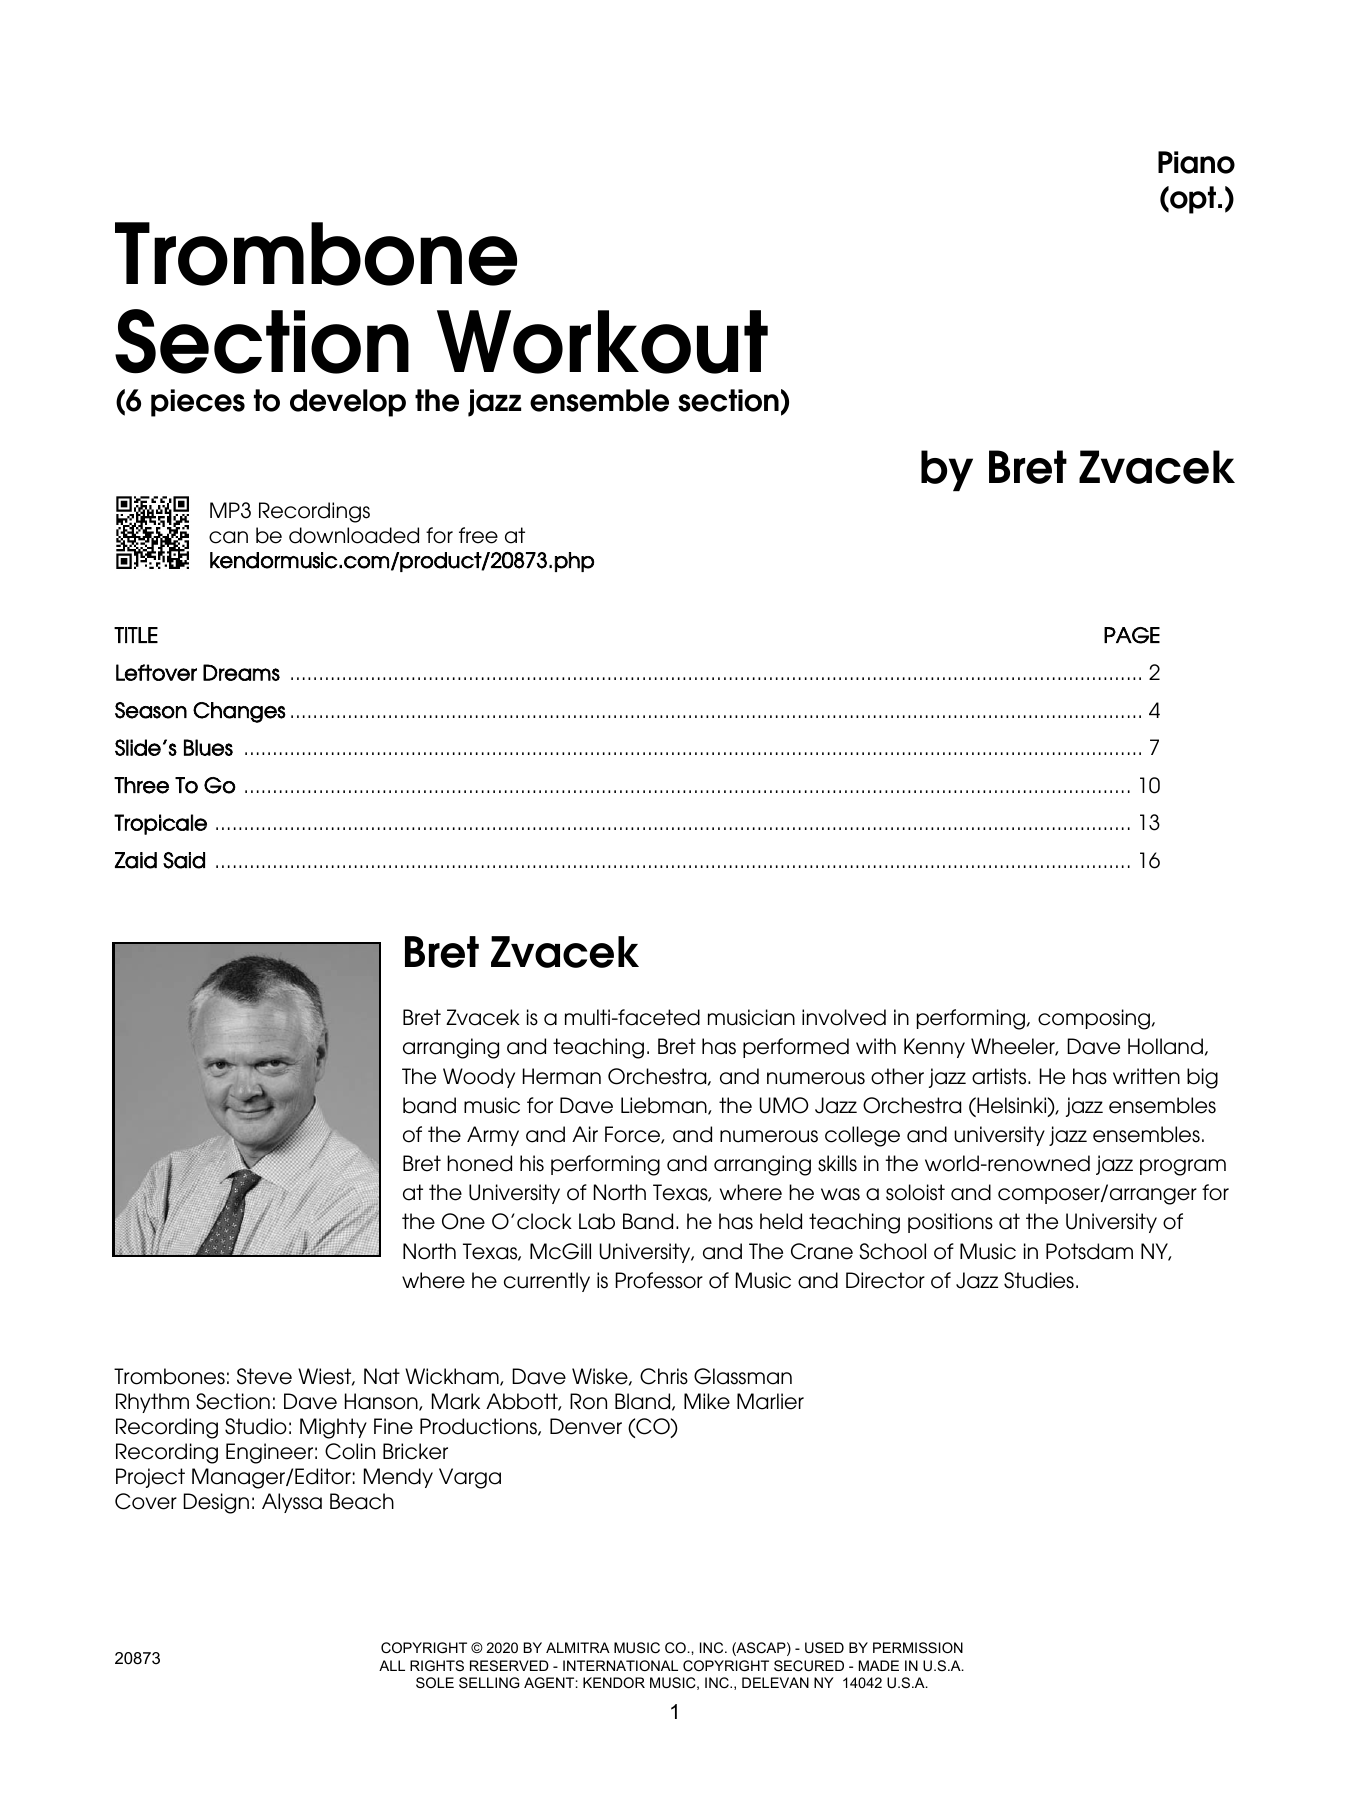 Download Bret Zvacek Trombone Section Workout with MP3's (6 pieces to develop the jazz ensemble section) - Piano sheet music and printable PDF score & Instructional music notes